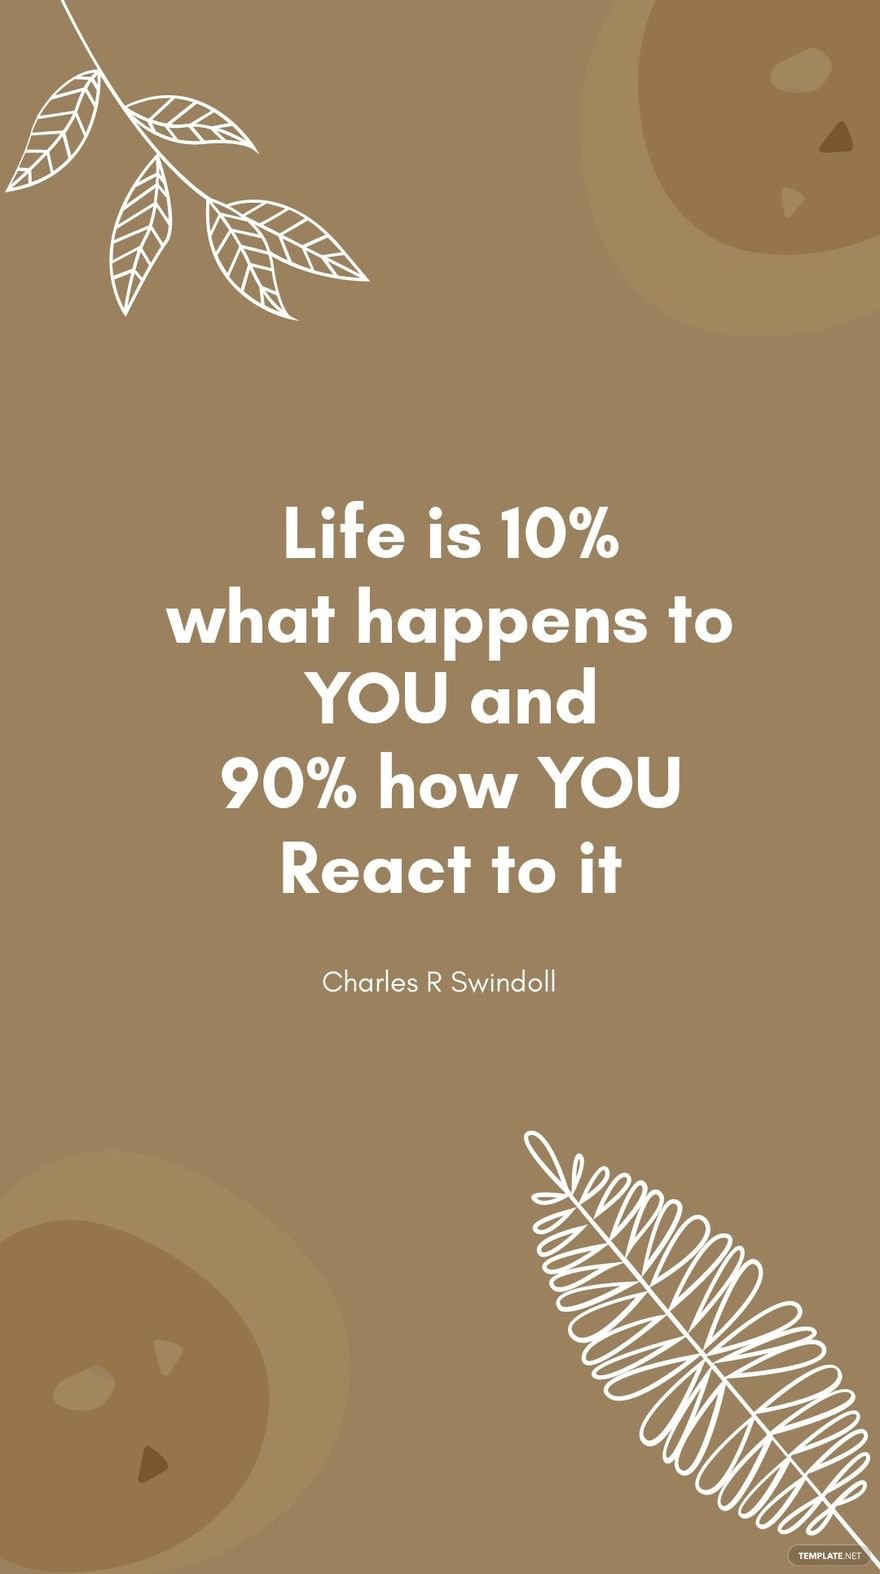 Free Charles R Swindoll - Life is 10% what happens to you and 90% how you react to it in JPG